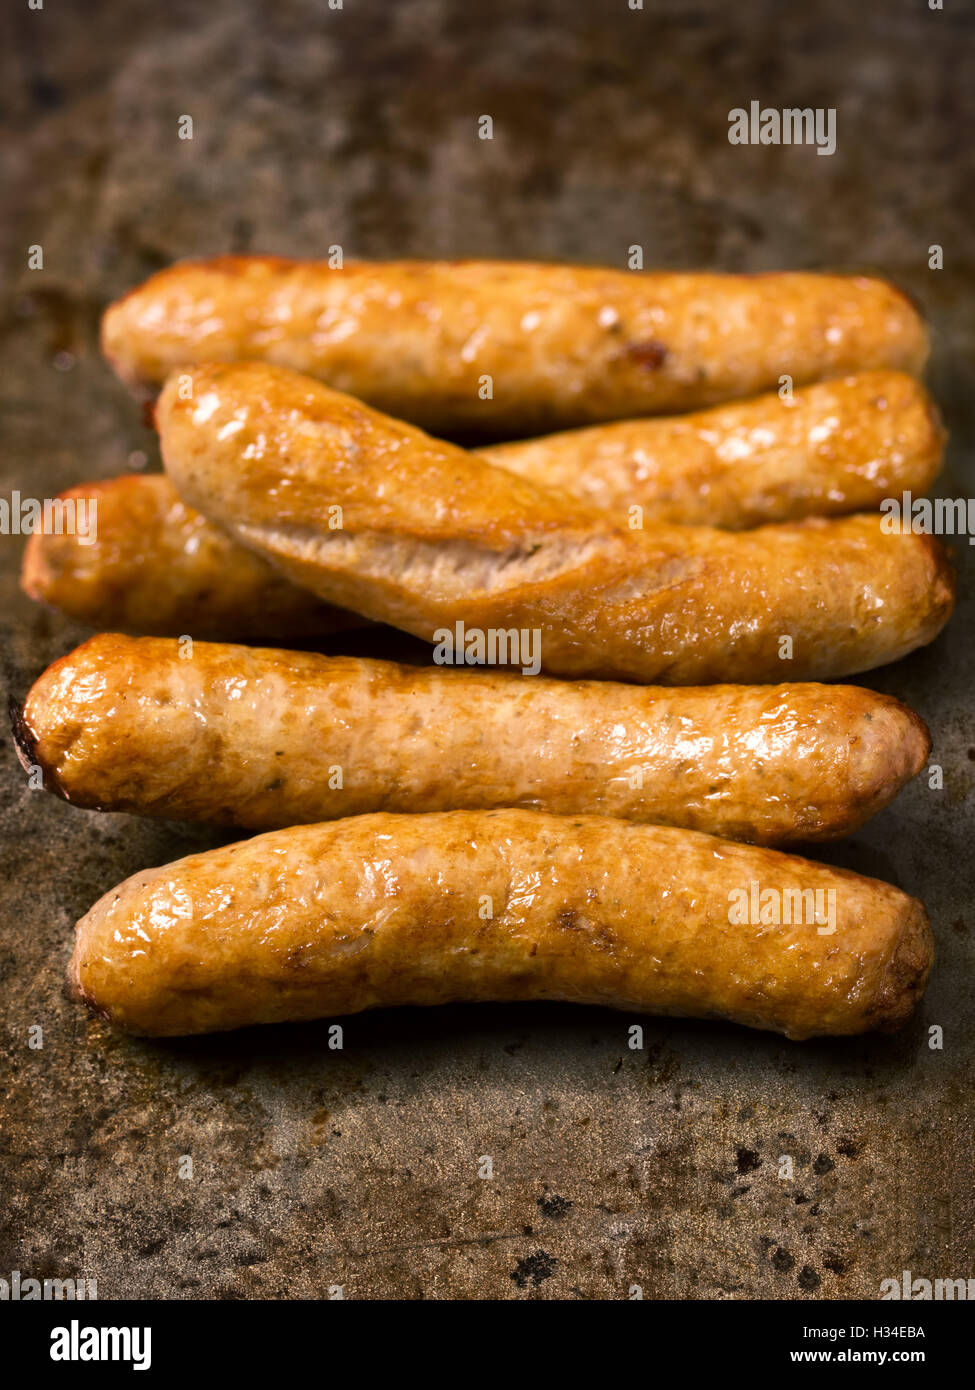 rustic cooked sausages Stock Photo